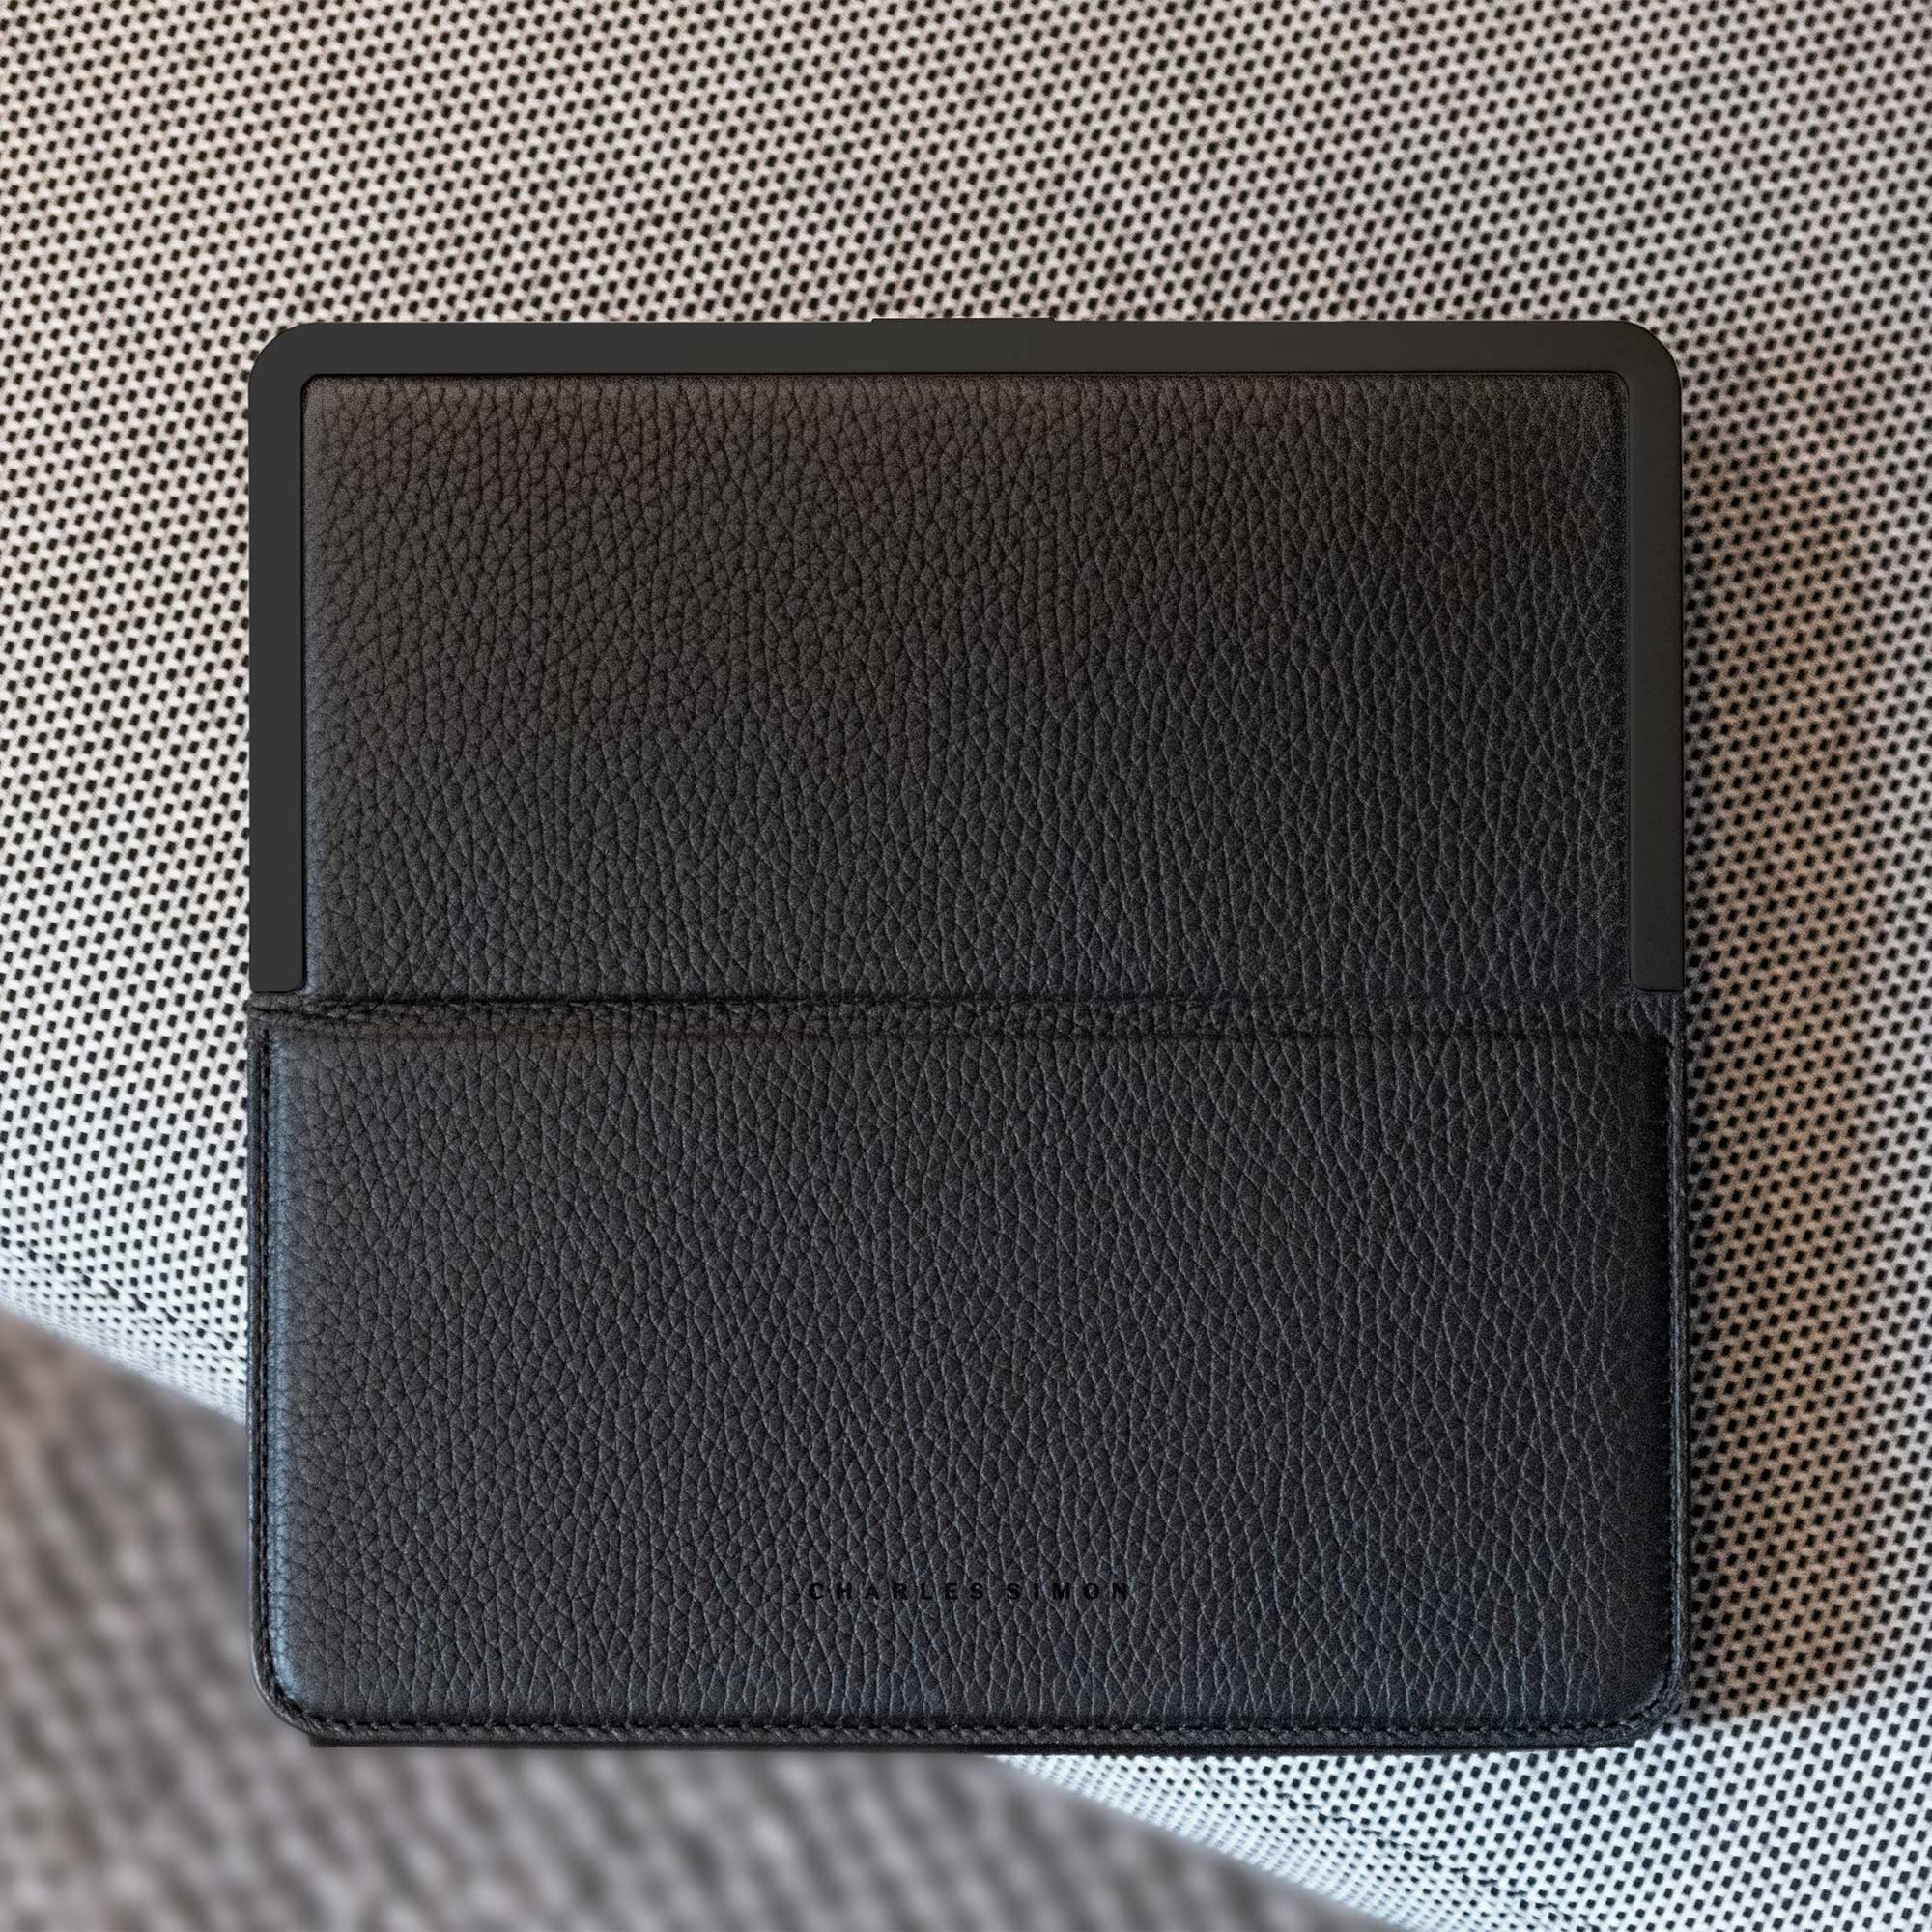 Charles_Simon_Fraser-travel-wallet_all-black, luxury travel wallet to hold all essentials, handmade in canada from premium leather